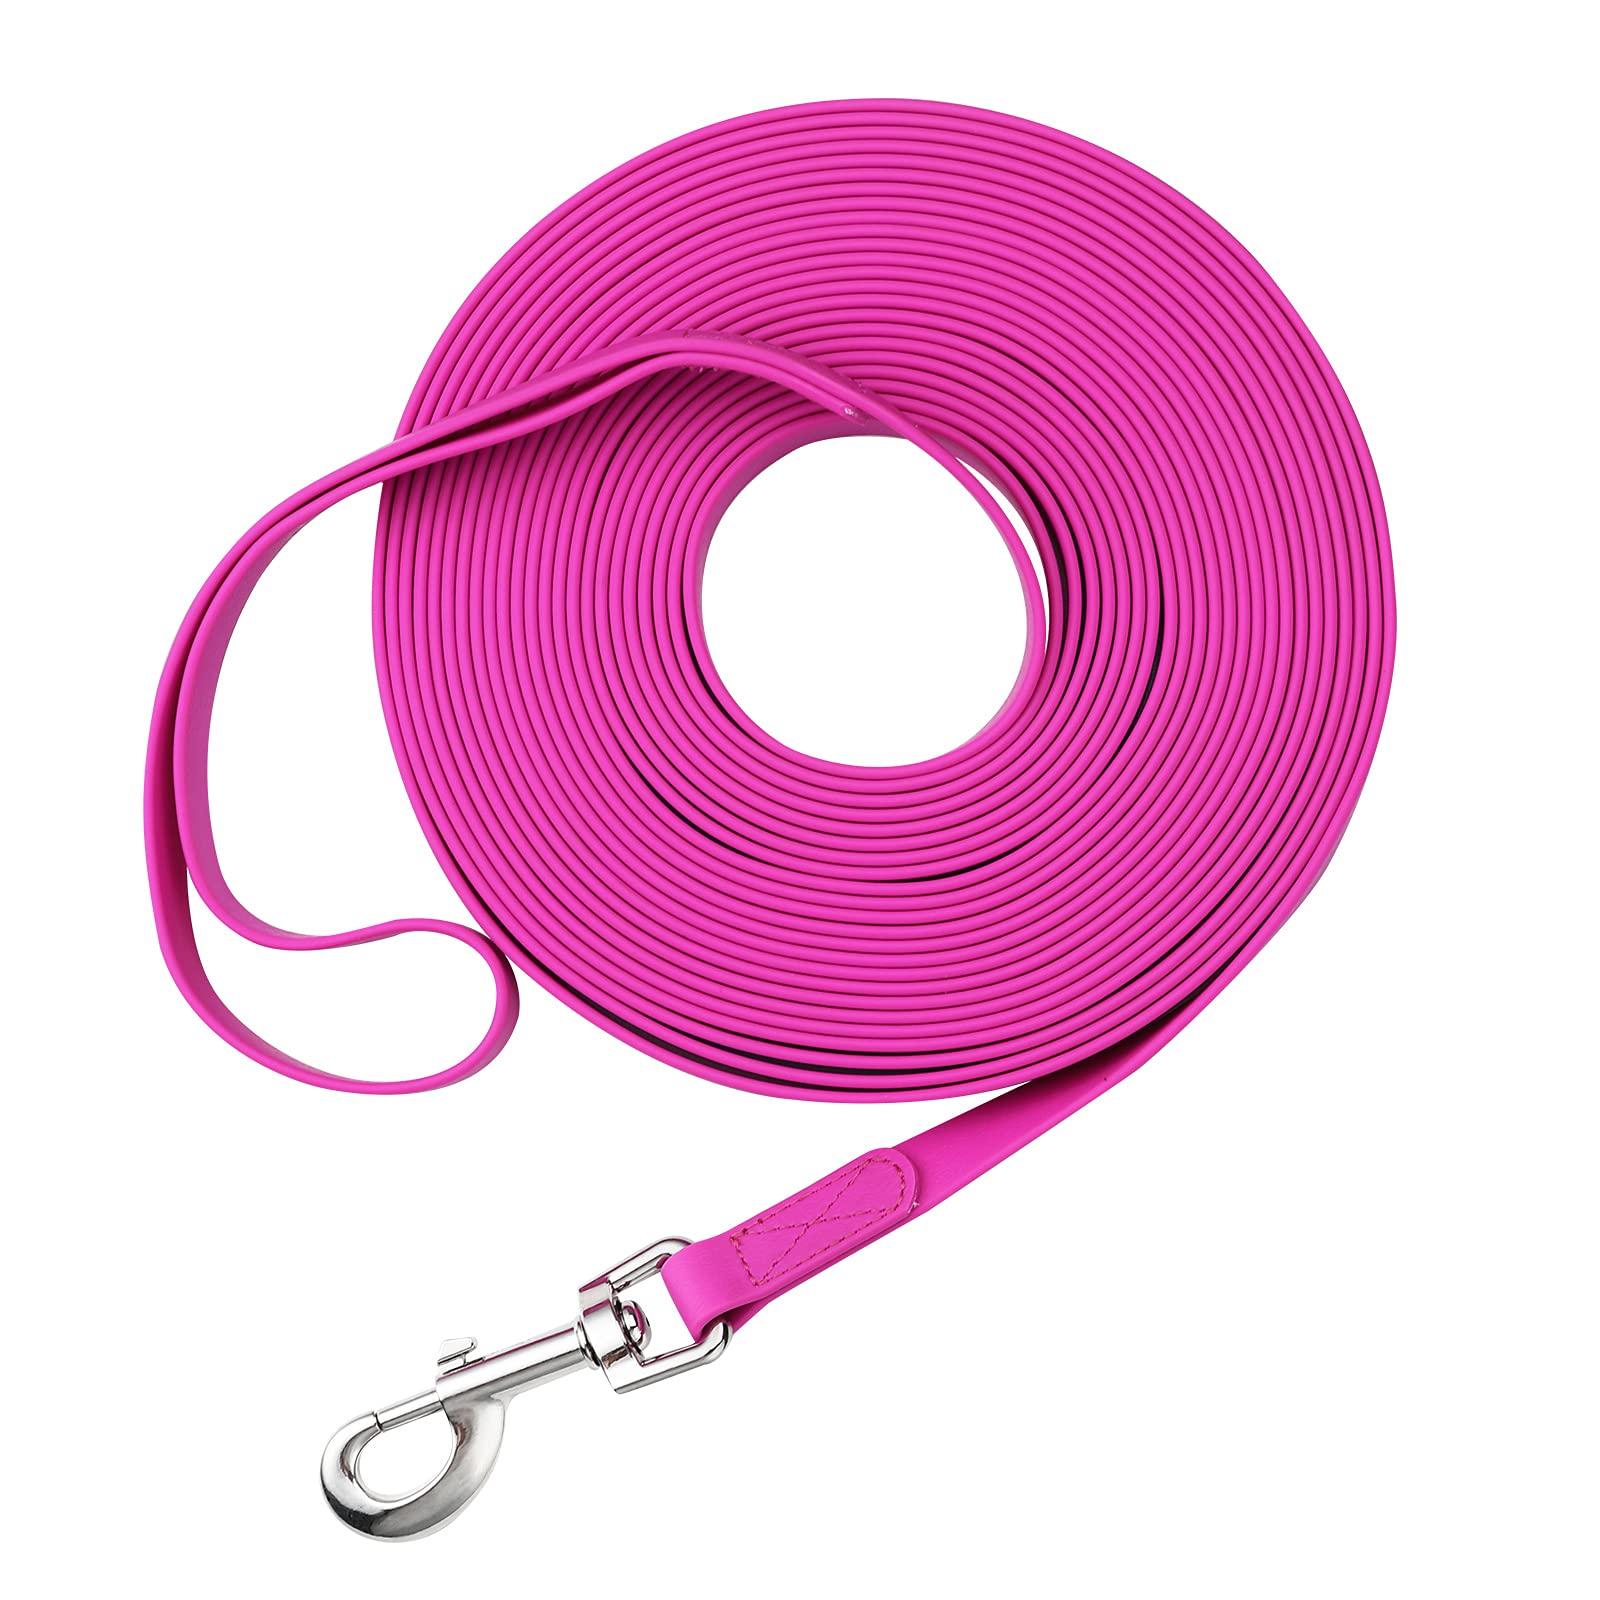 Waterproof Long Leash Durable Dog Recall Training Lead Great for Outdoor Hiking, Training, Yard, Beach and Swimming (Purple, 50ft)